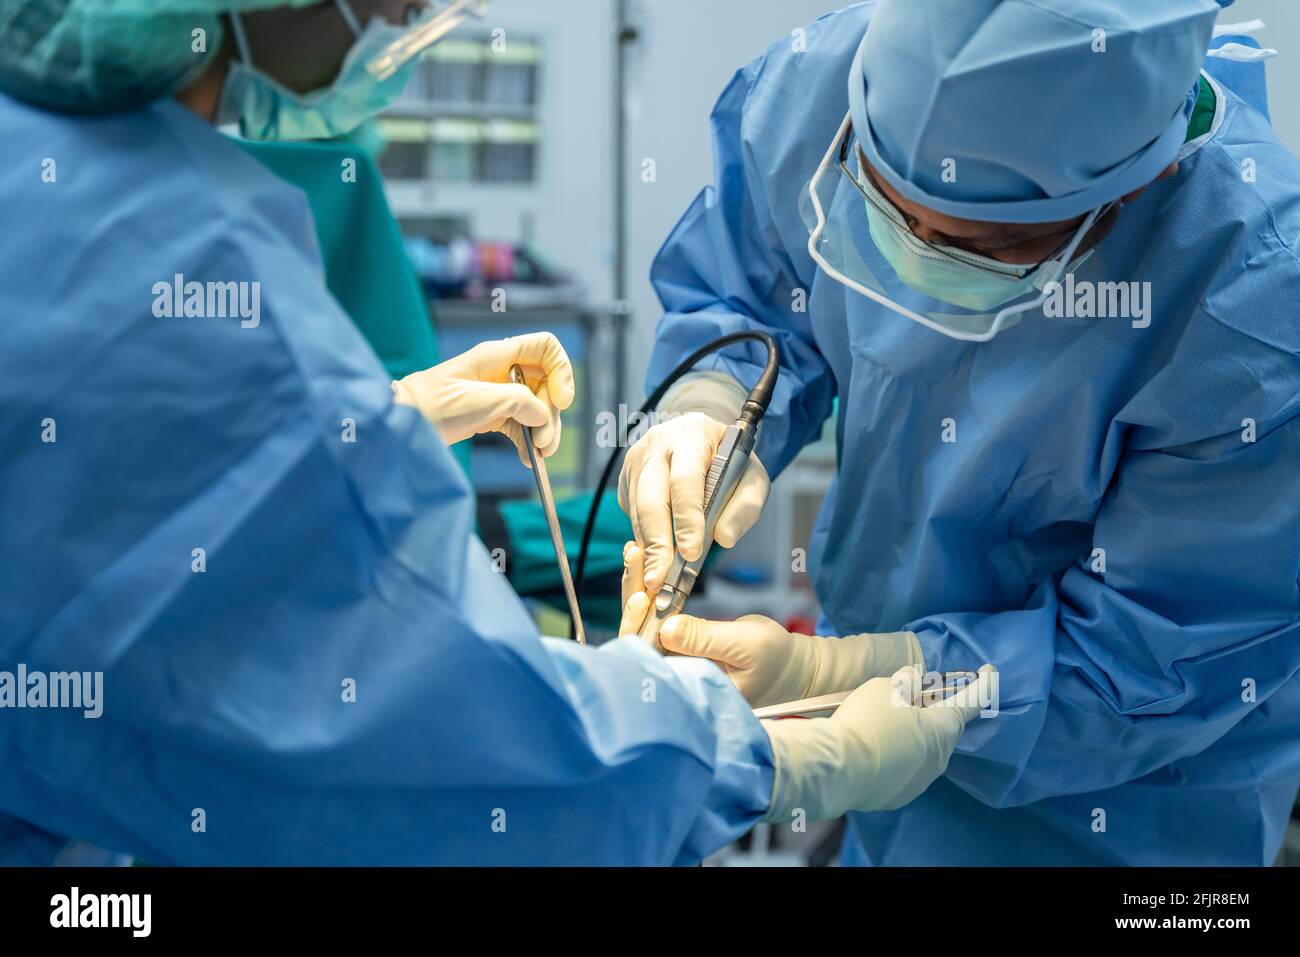 Medical team of surgeons and assistant in hospital doing orthopedic surgery. Surgery operating room with electrocautery equipment for cardiovascular e Stock Photo